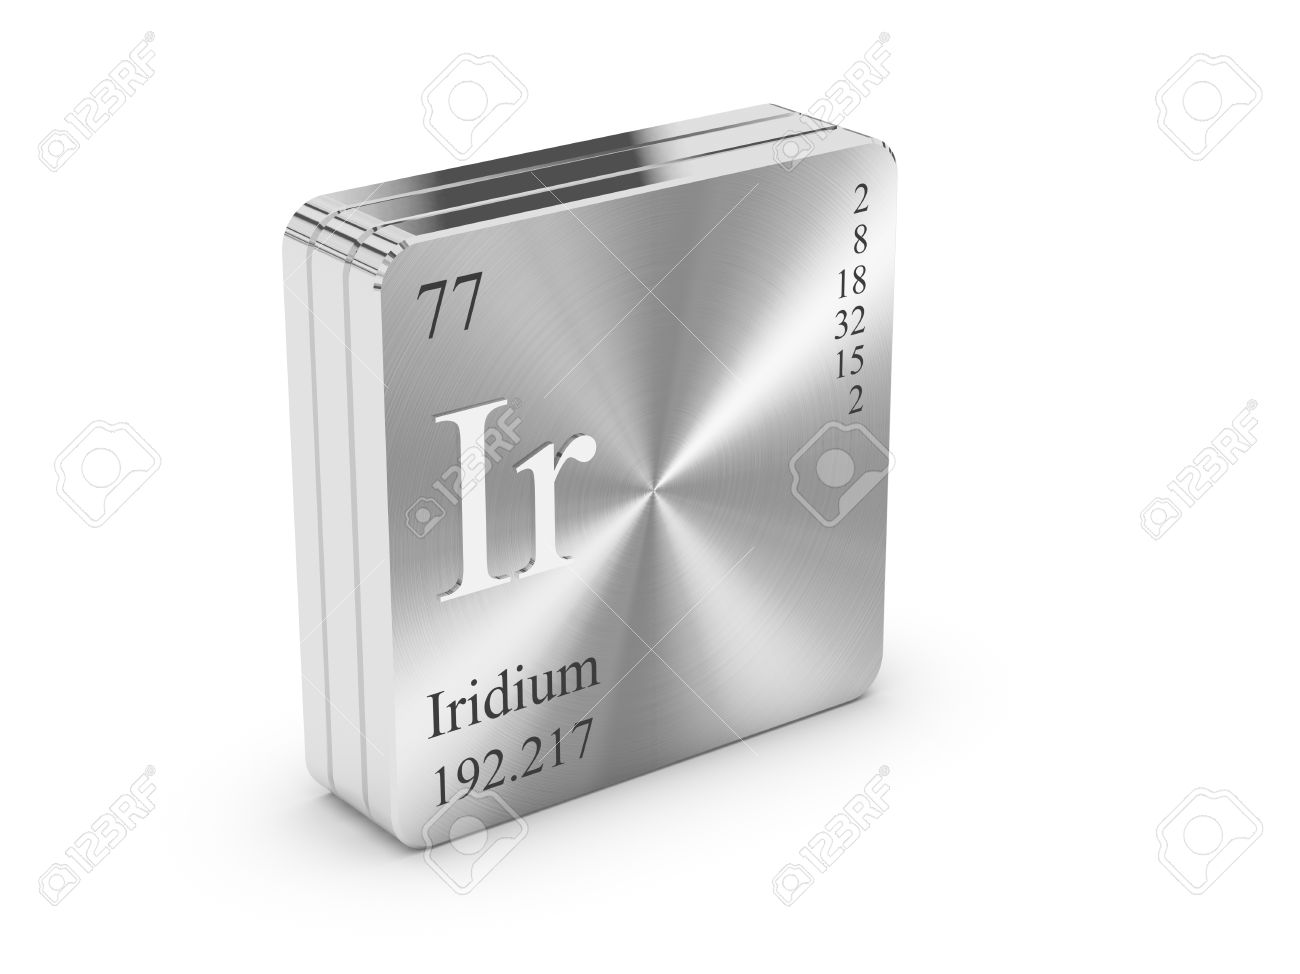 Iridium - weight account - This product is not delivered